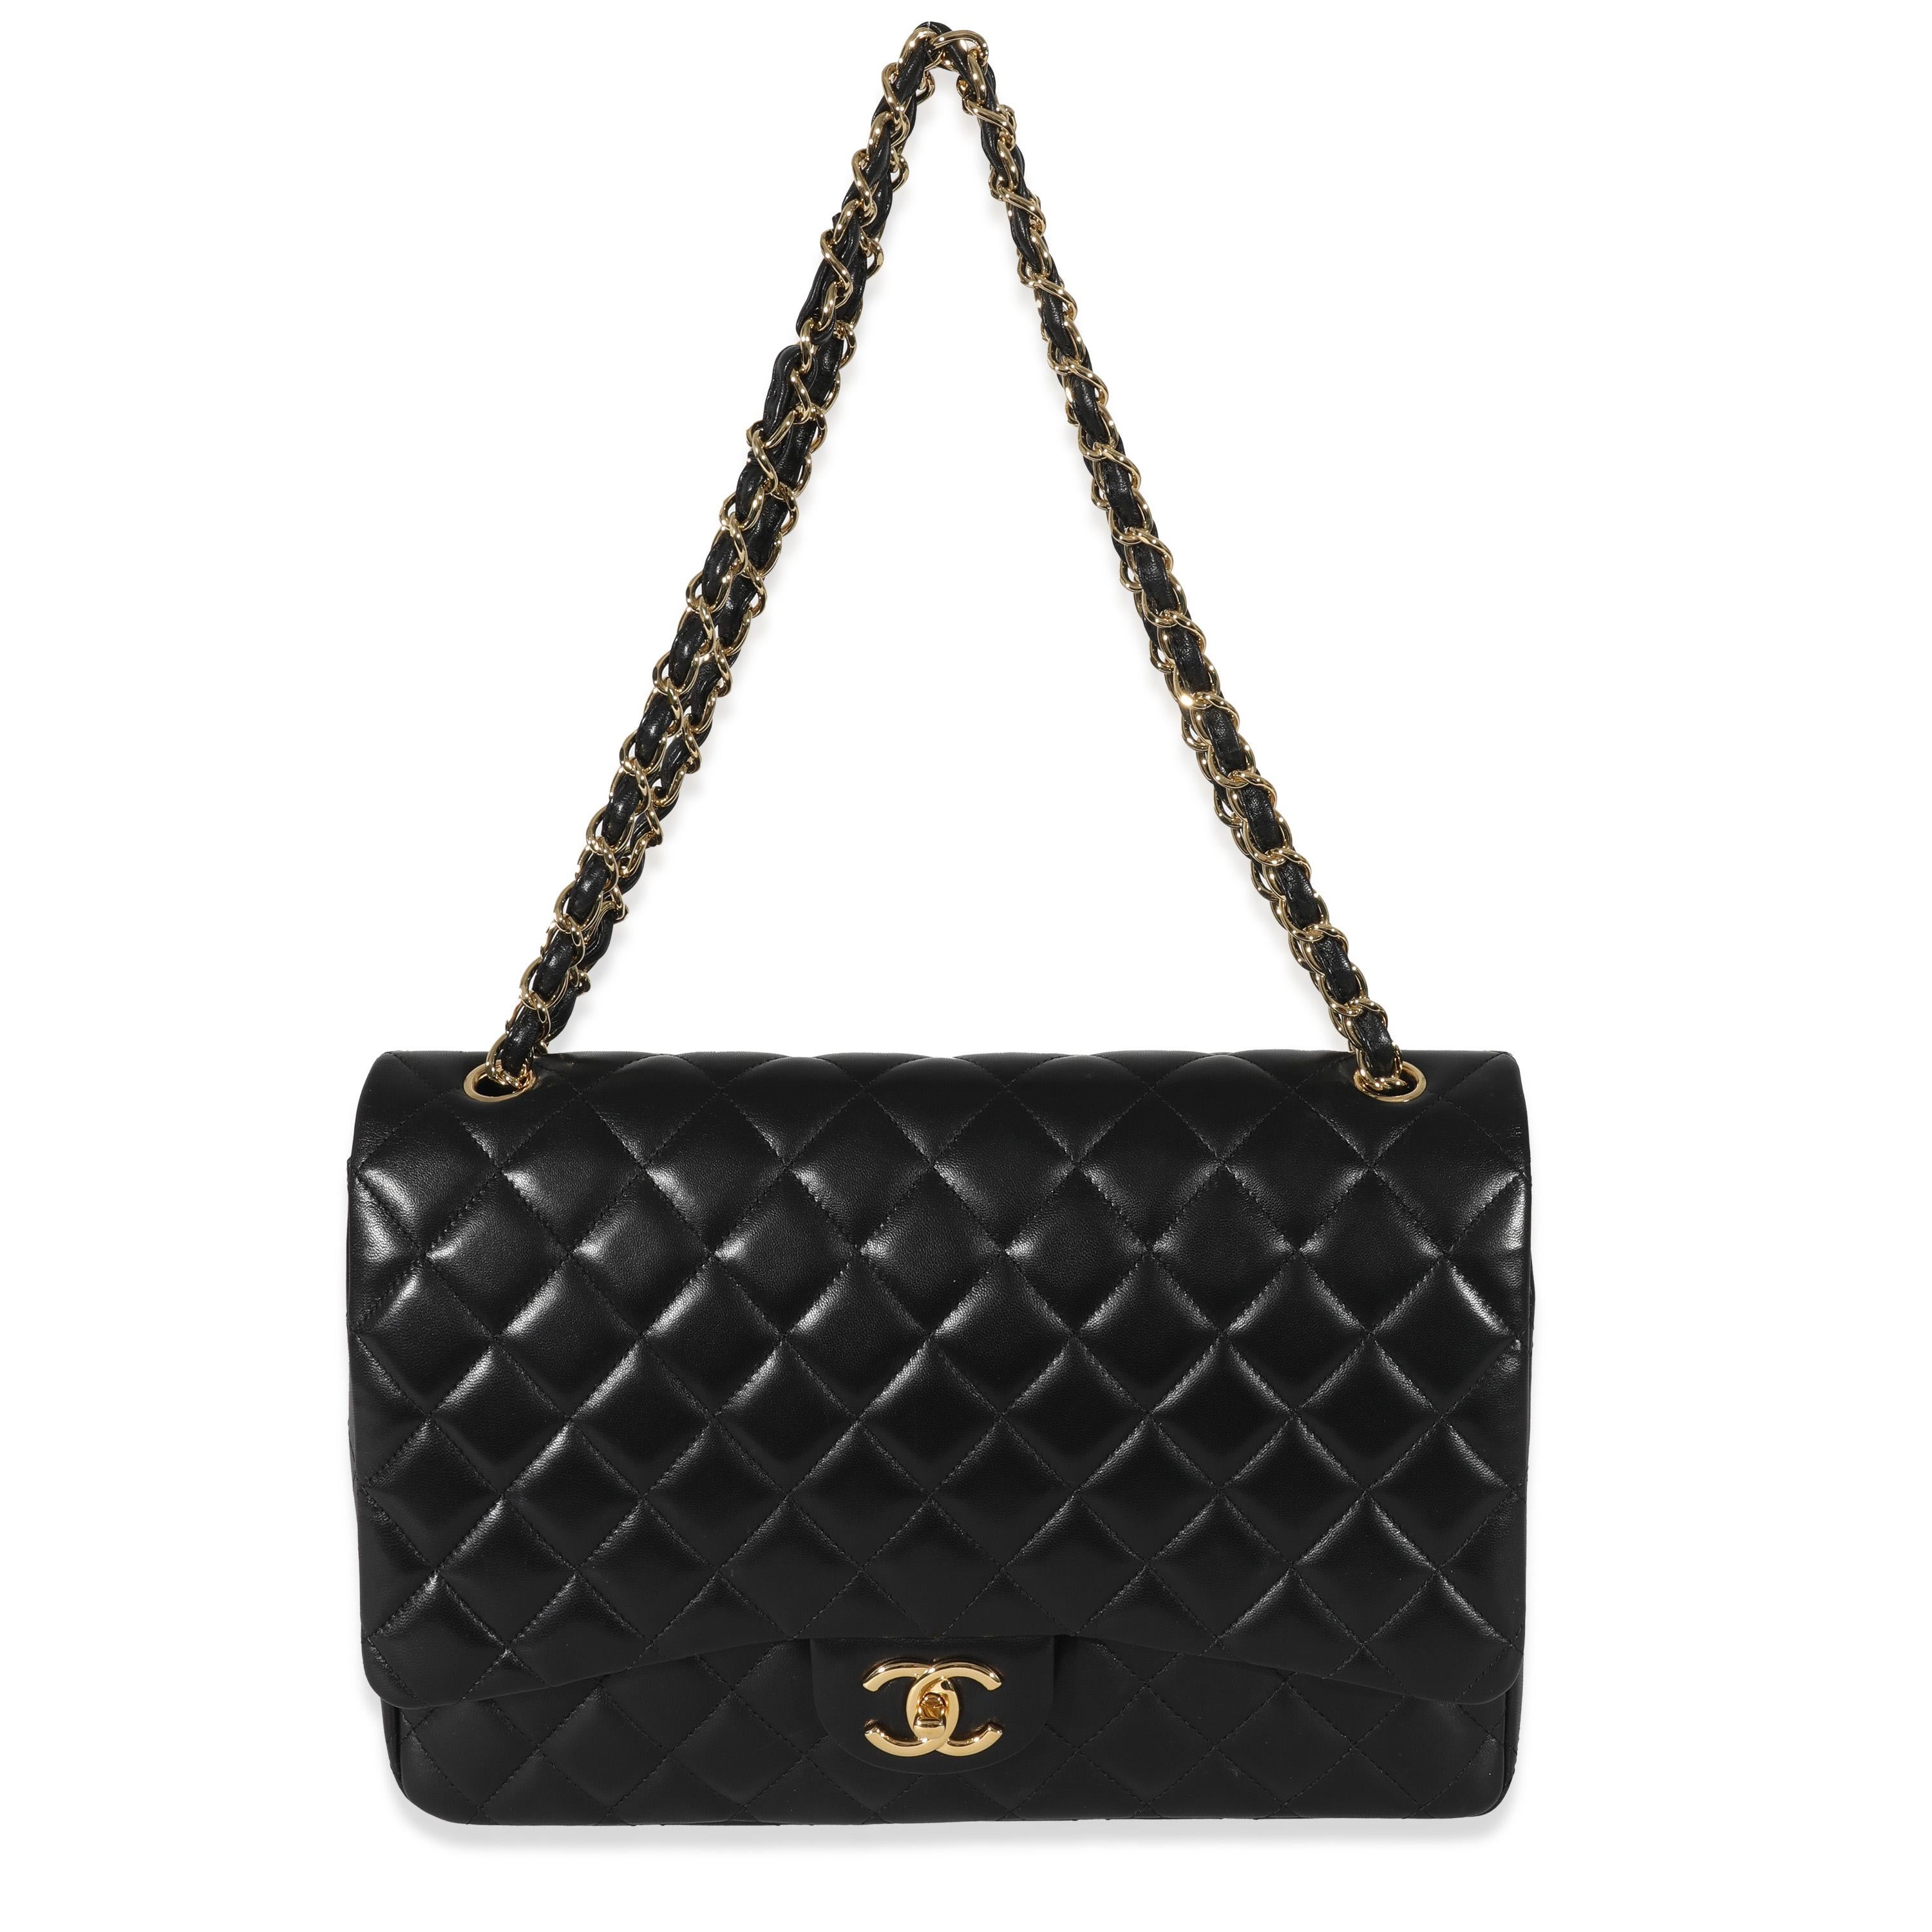 Listing Title: Chanel Black Lambskin Classic Maxi Double Flap Bag
SKU: 130512
Condition: Pre-owned 
Handbag Condition: Very Good
Condition Comments: Item is in very good condition with minor signs of wear. Exterior heavy scuffing and indentation